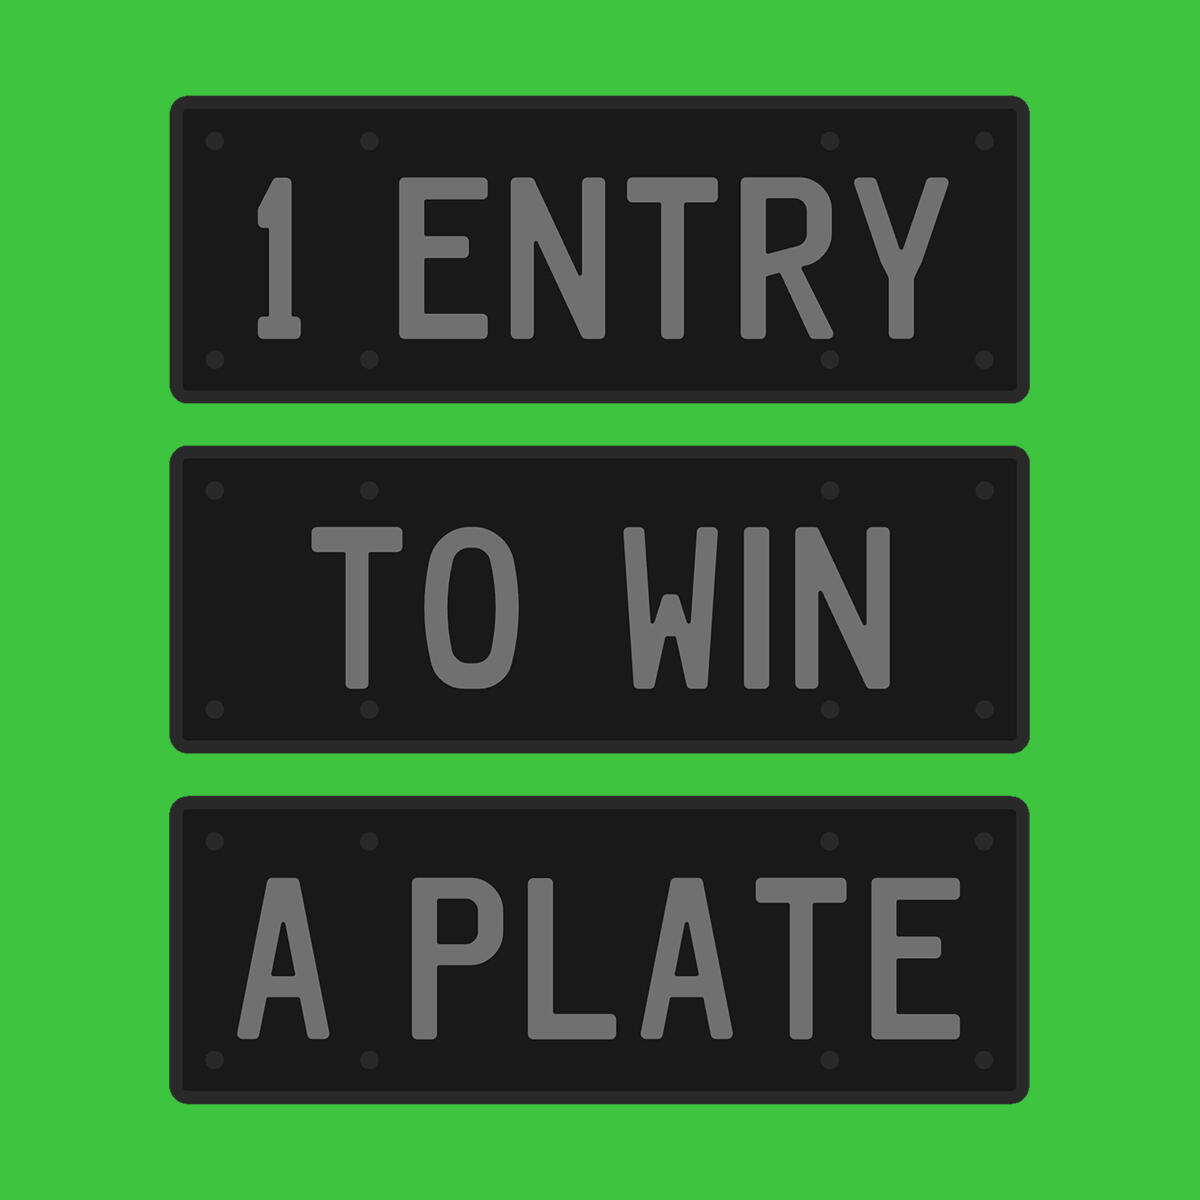 1 ENTRY TO WIN A PLATE